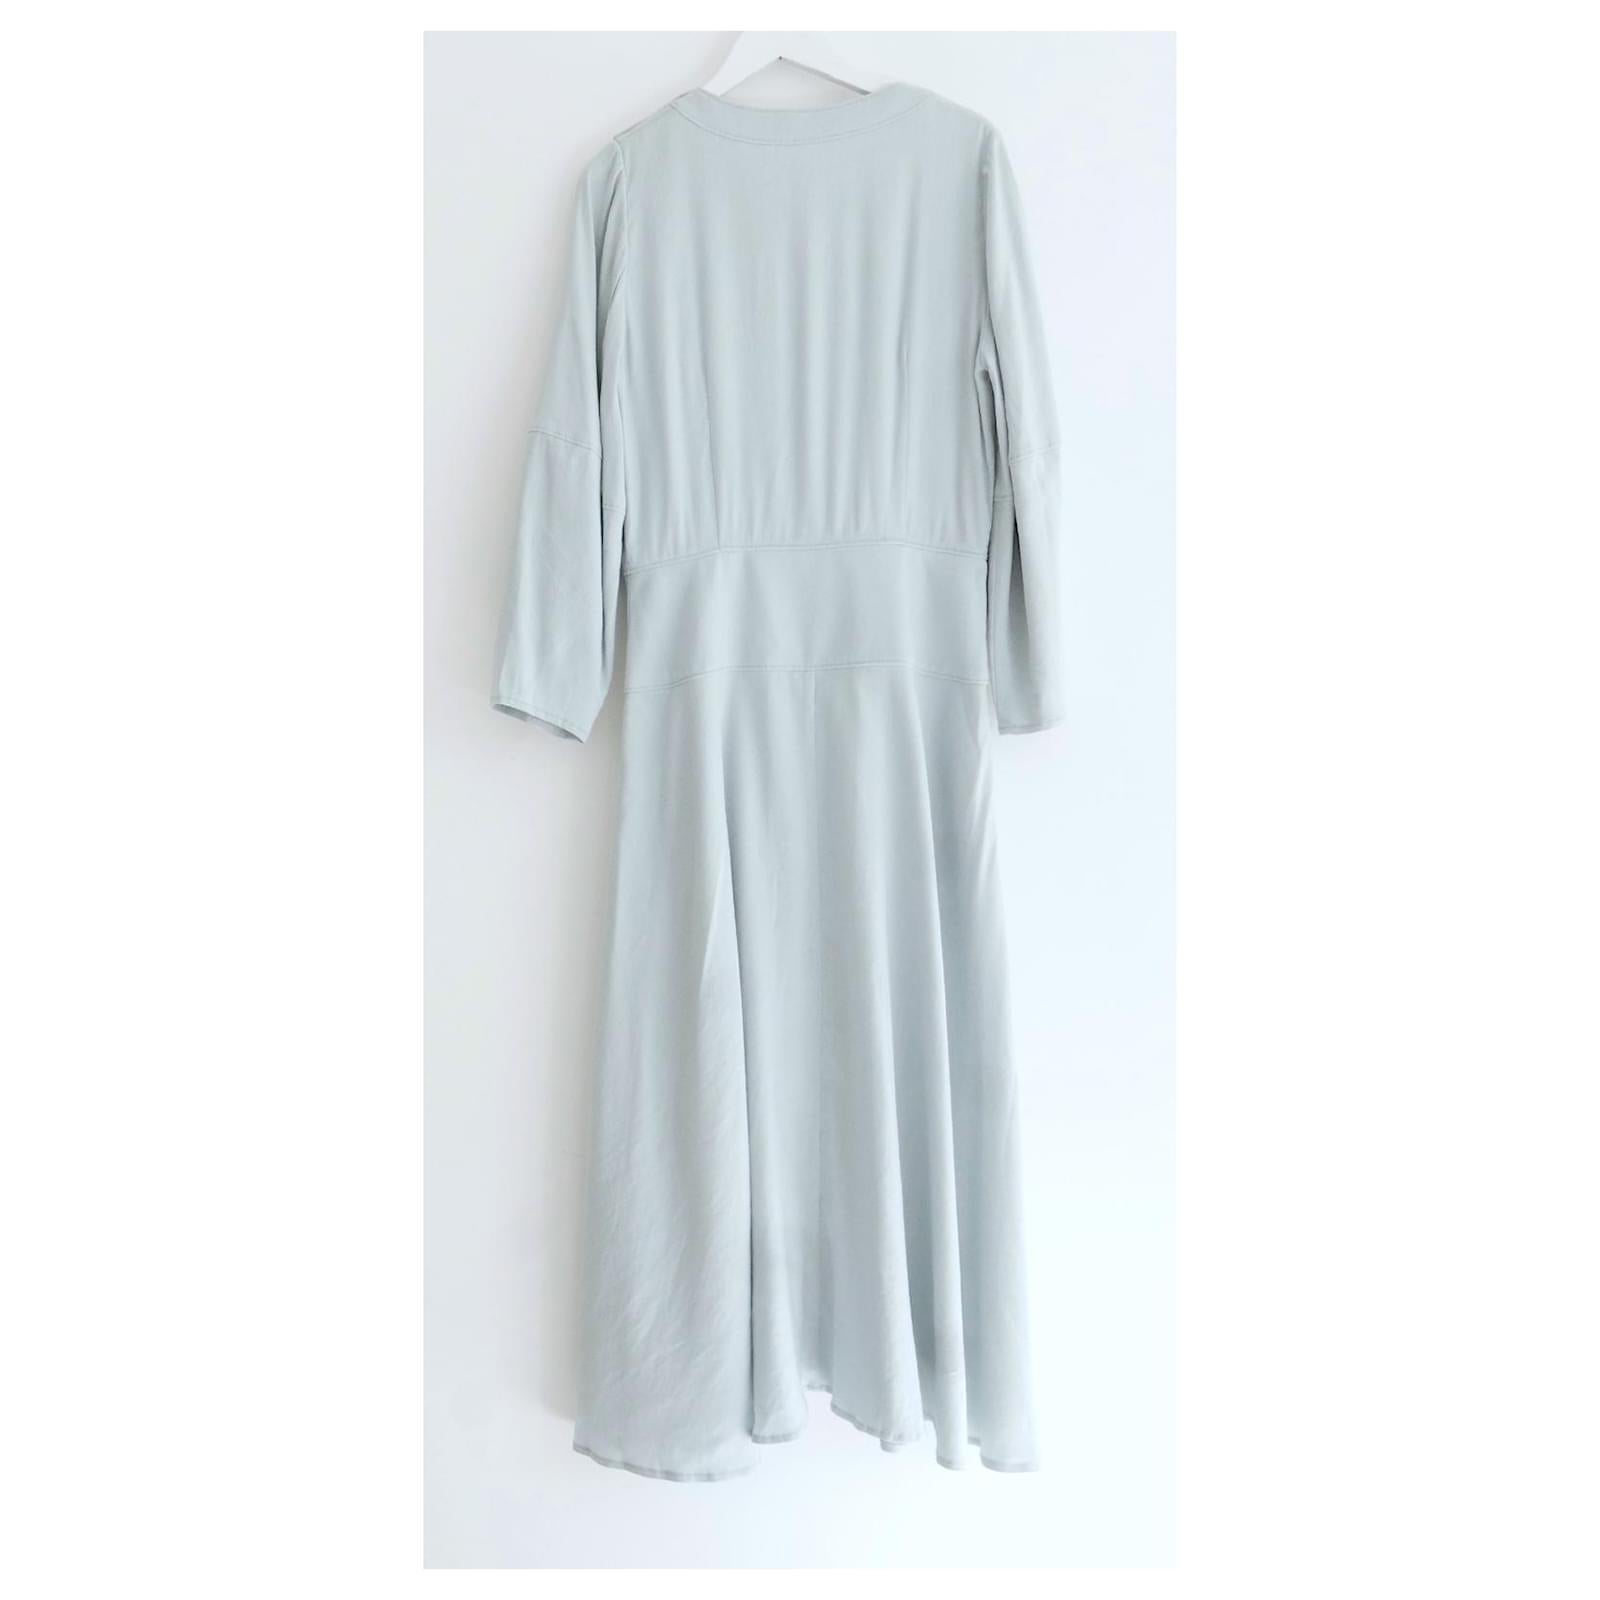 Modern feminine Rejina Pyo Michaela midi dress. Bought for £750 and worn once. 
Made from pale sea foam green linen mix chambray. It has a super flattering cut with chunky buttons to front, 
small breast pocket and flared skirt. Size UK10/fr38.